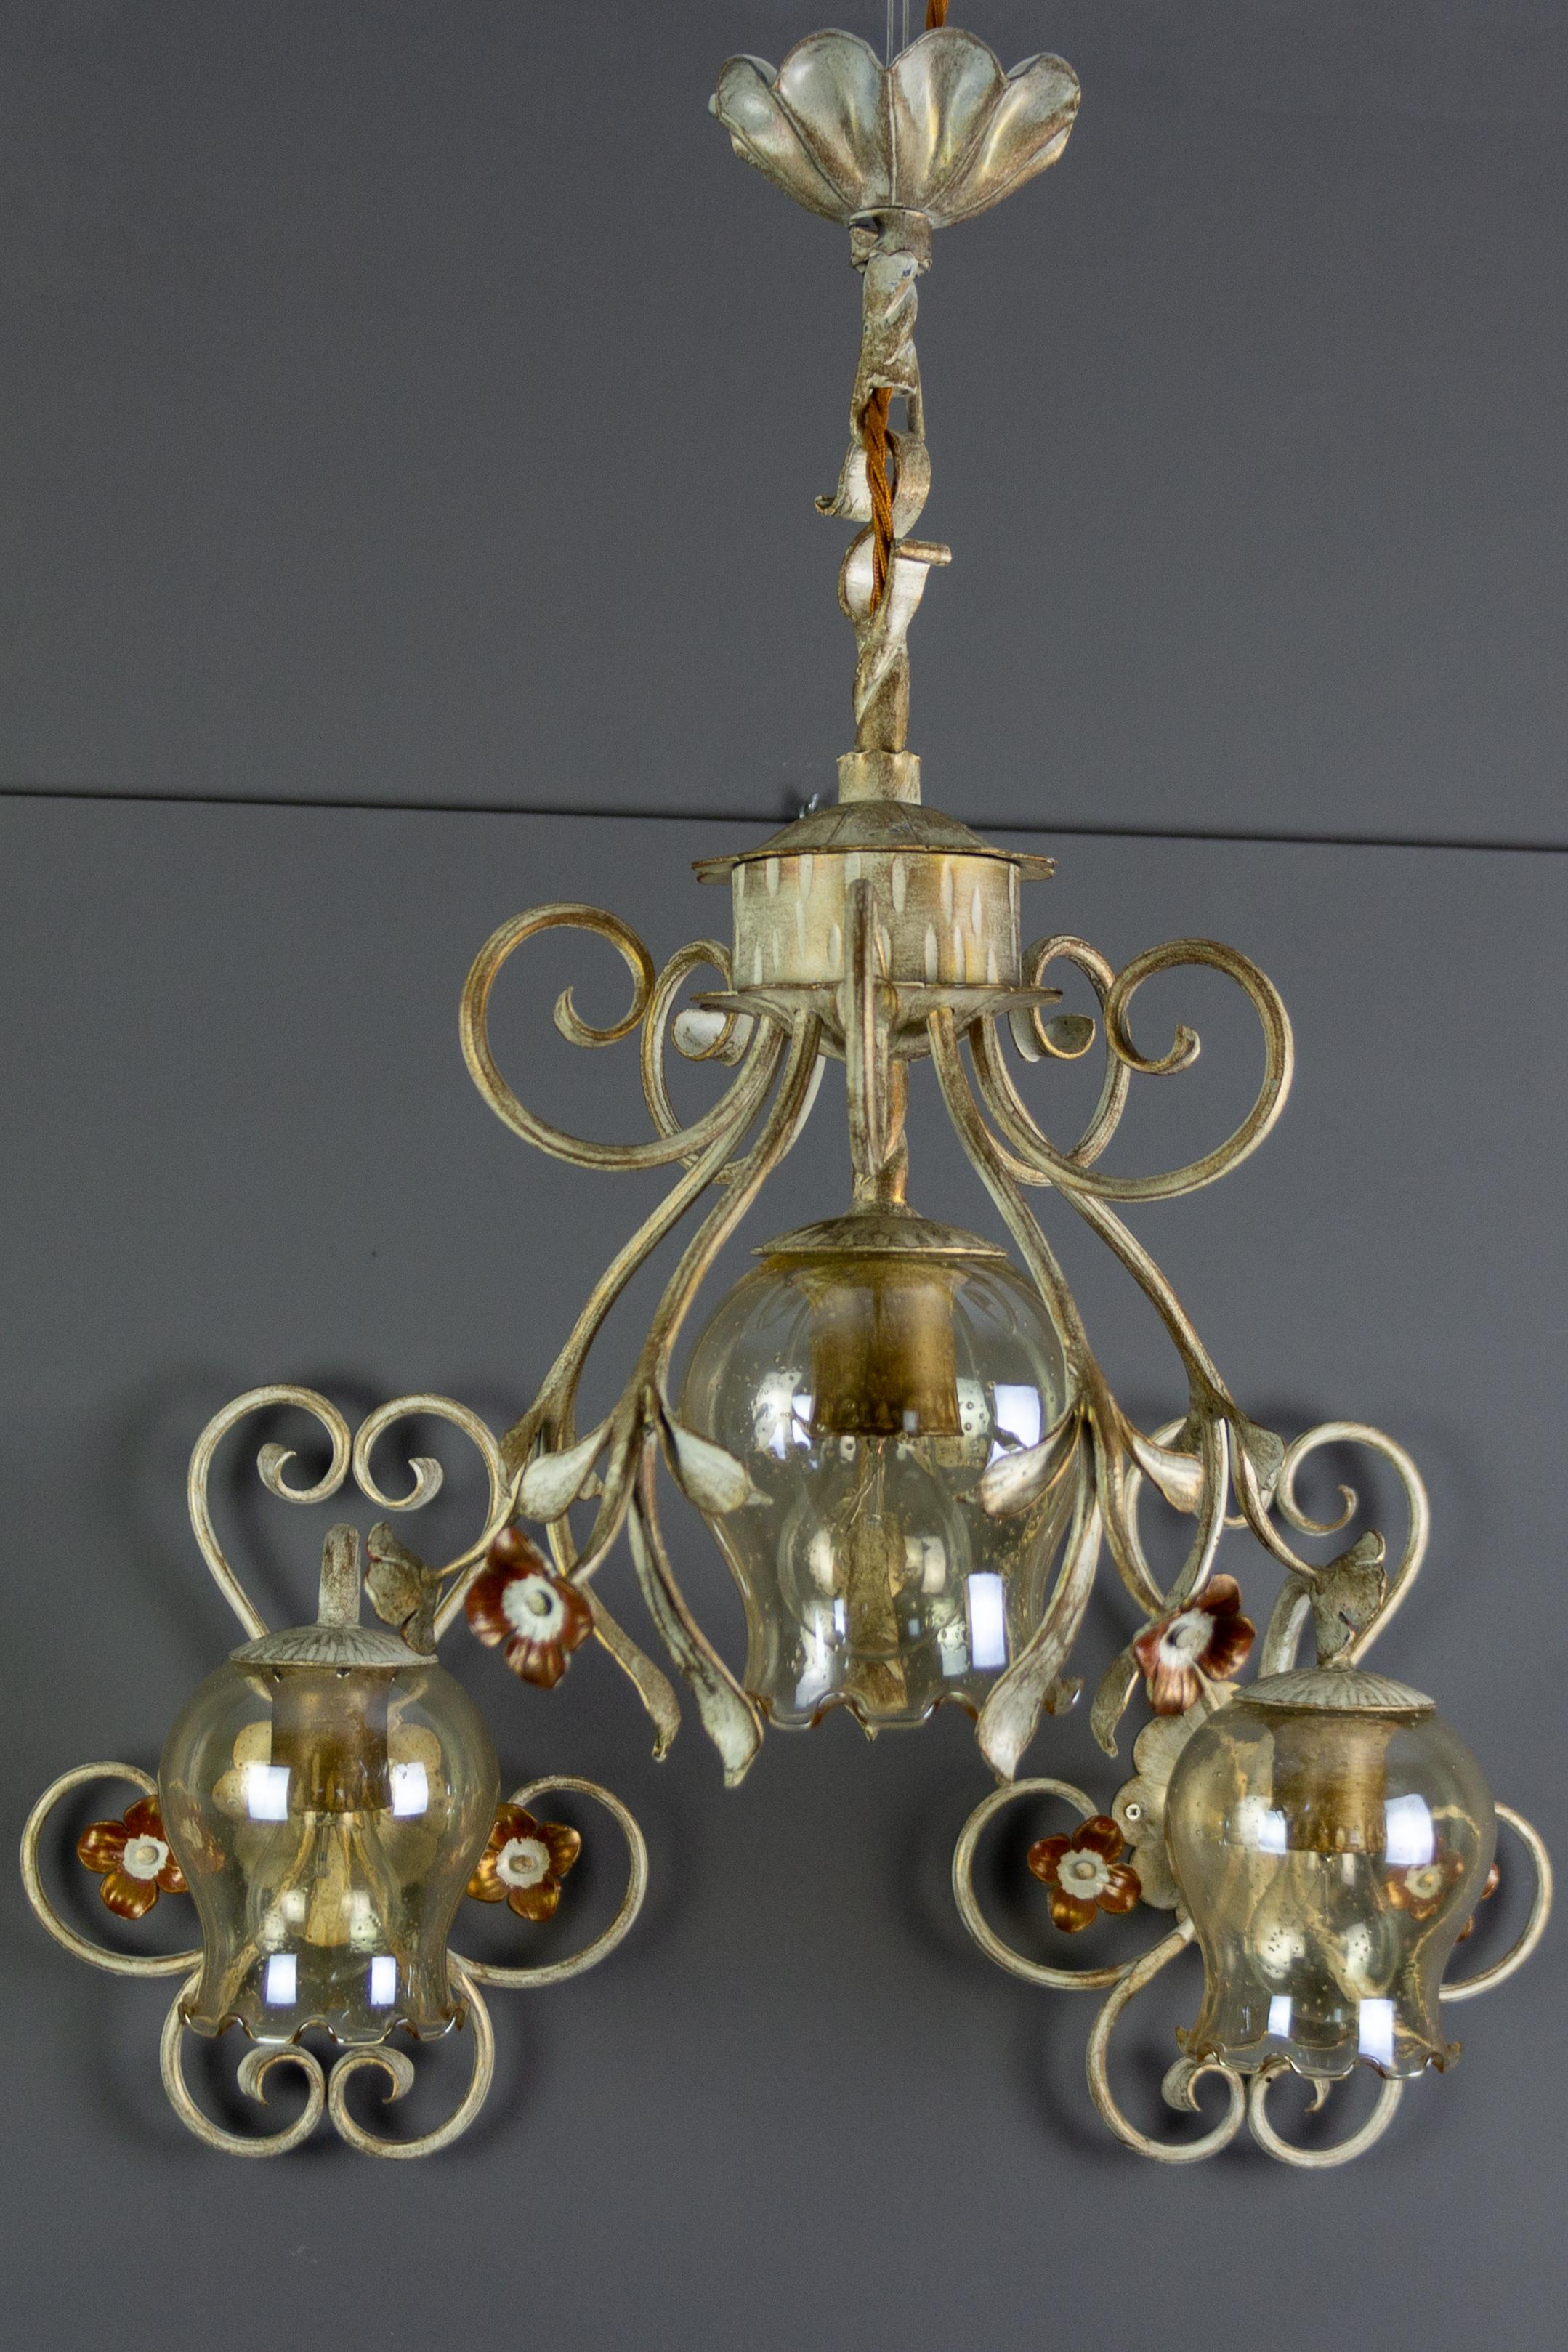 This adorable German blacksmith artwork set consists of one pendant light fixture and two wall sconces. Light fixtures are made of white and golden patinated wrought iron, each with a smoky glass lampshade and beautiful floral decors.
Each lamp has